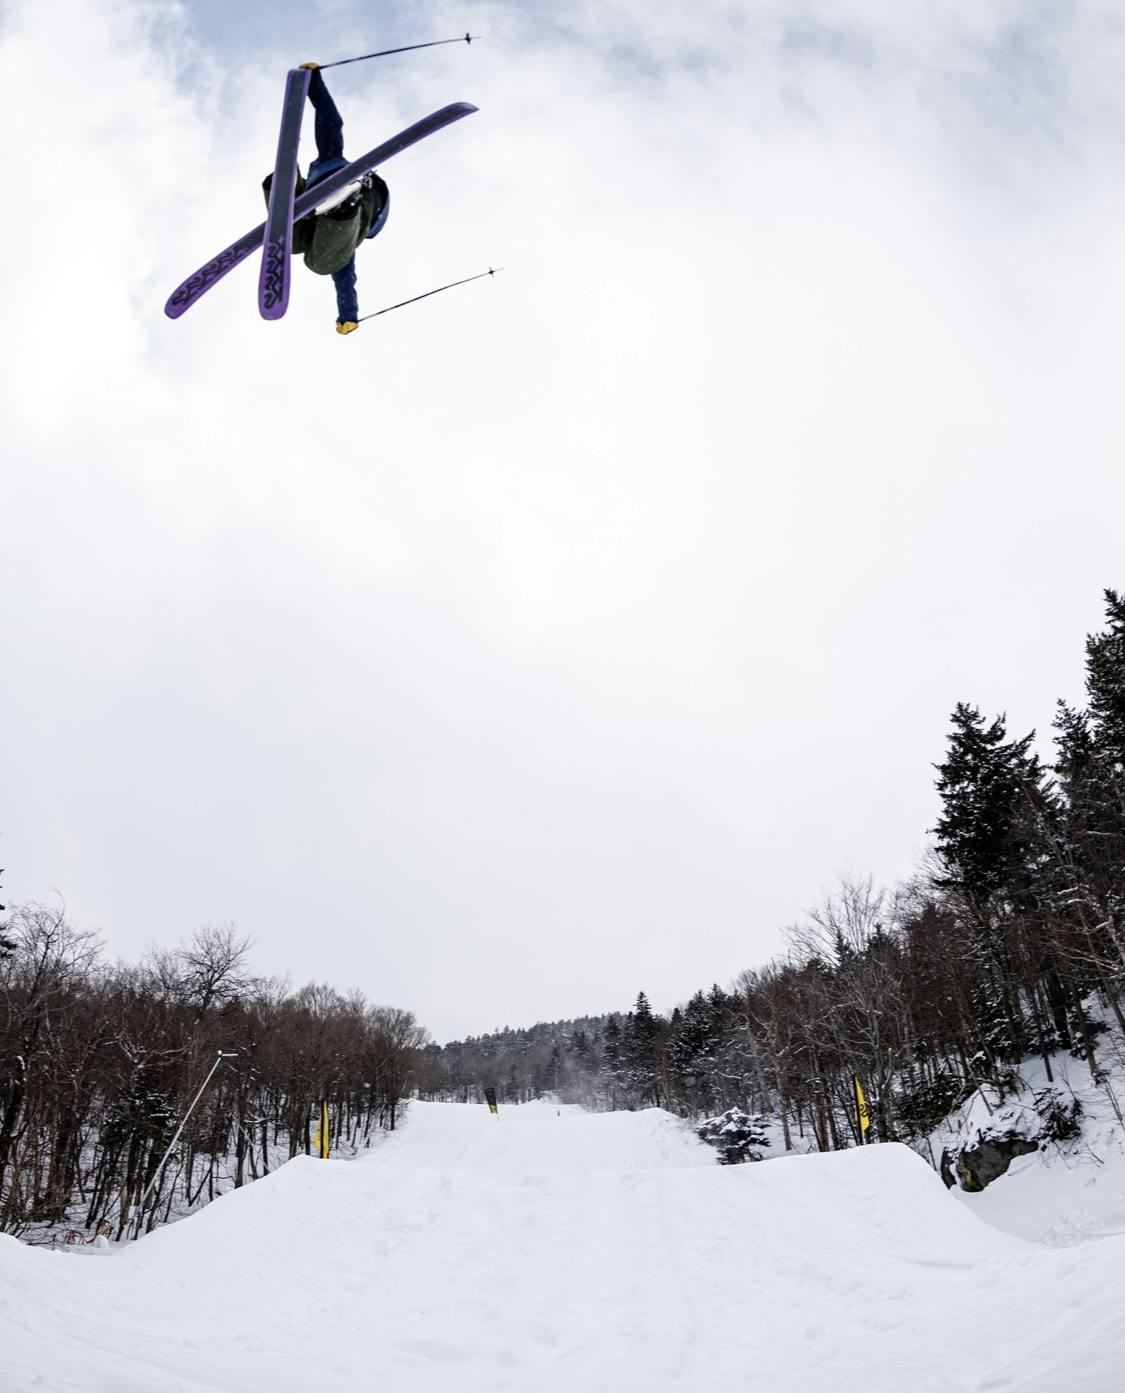 A skier gets air off a jump and grabs the tail of his ski.